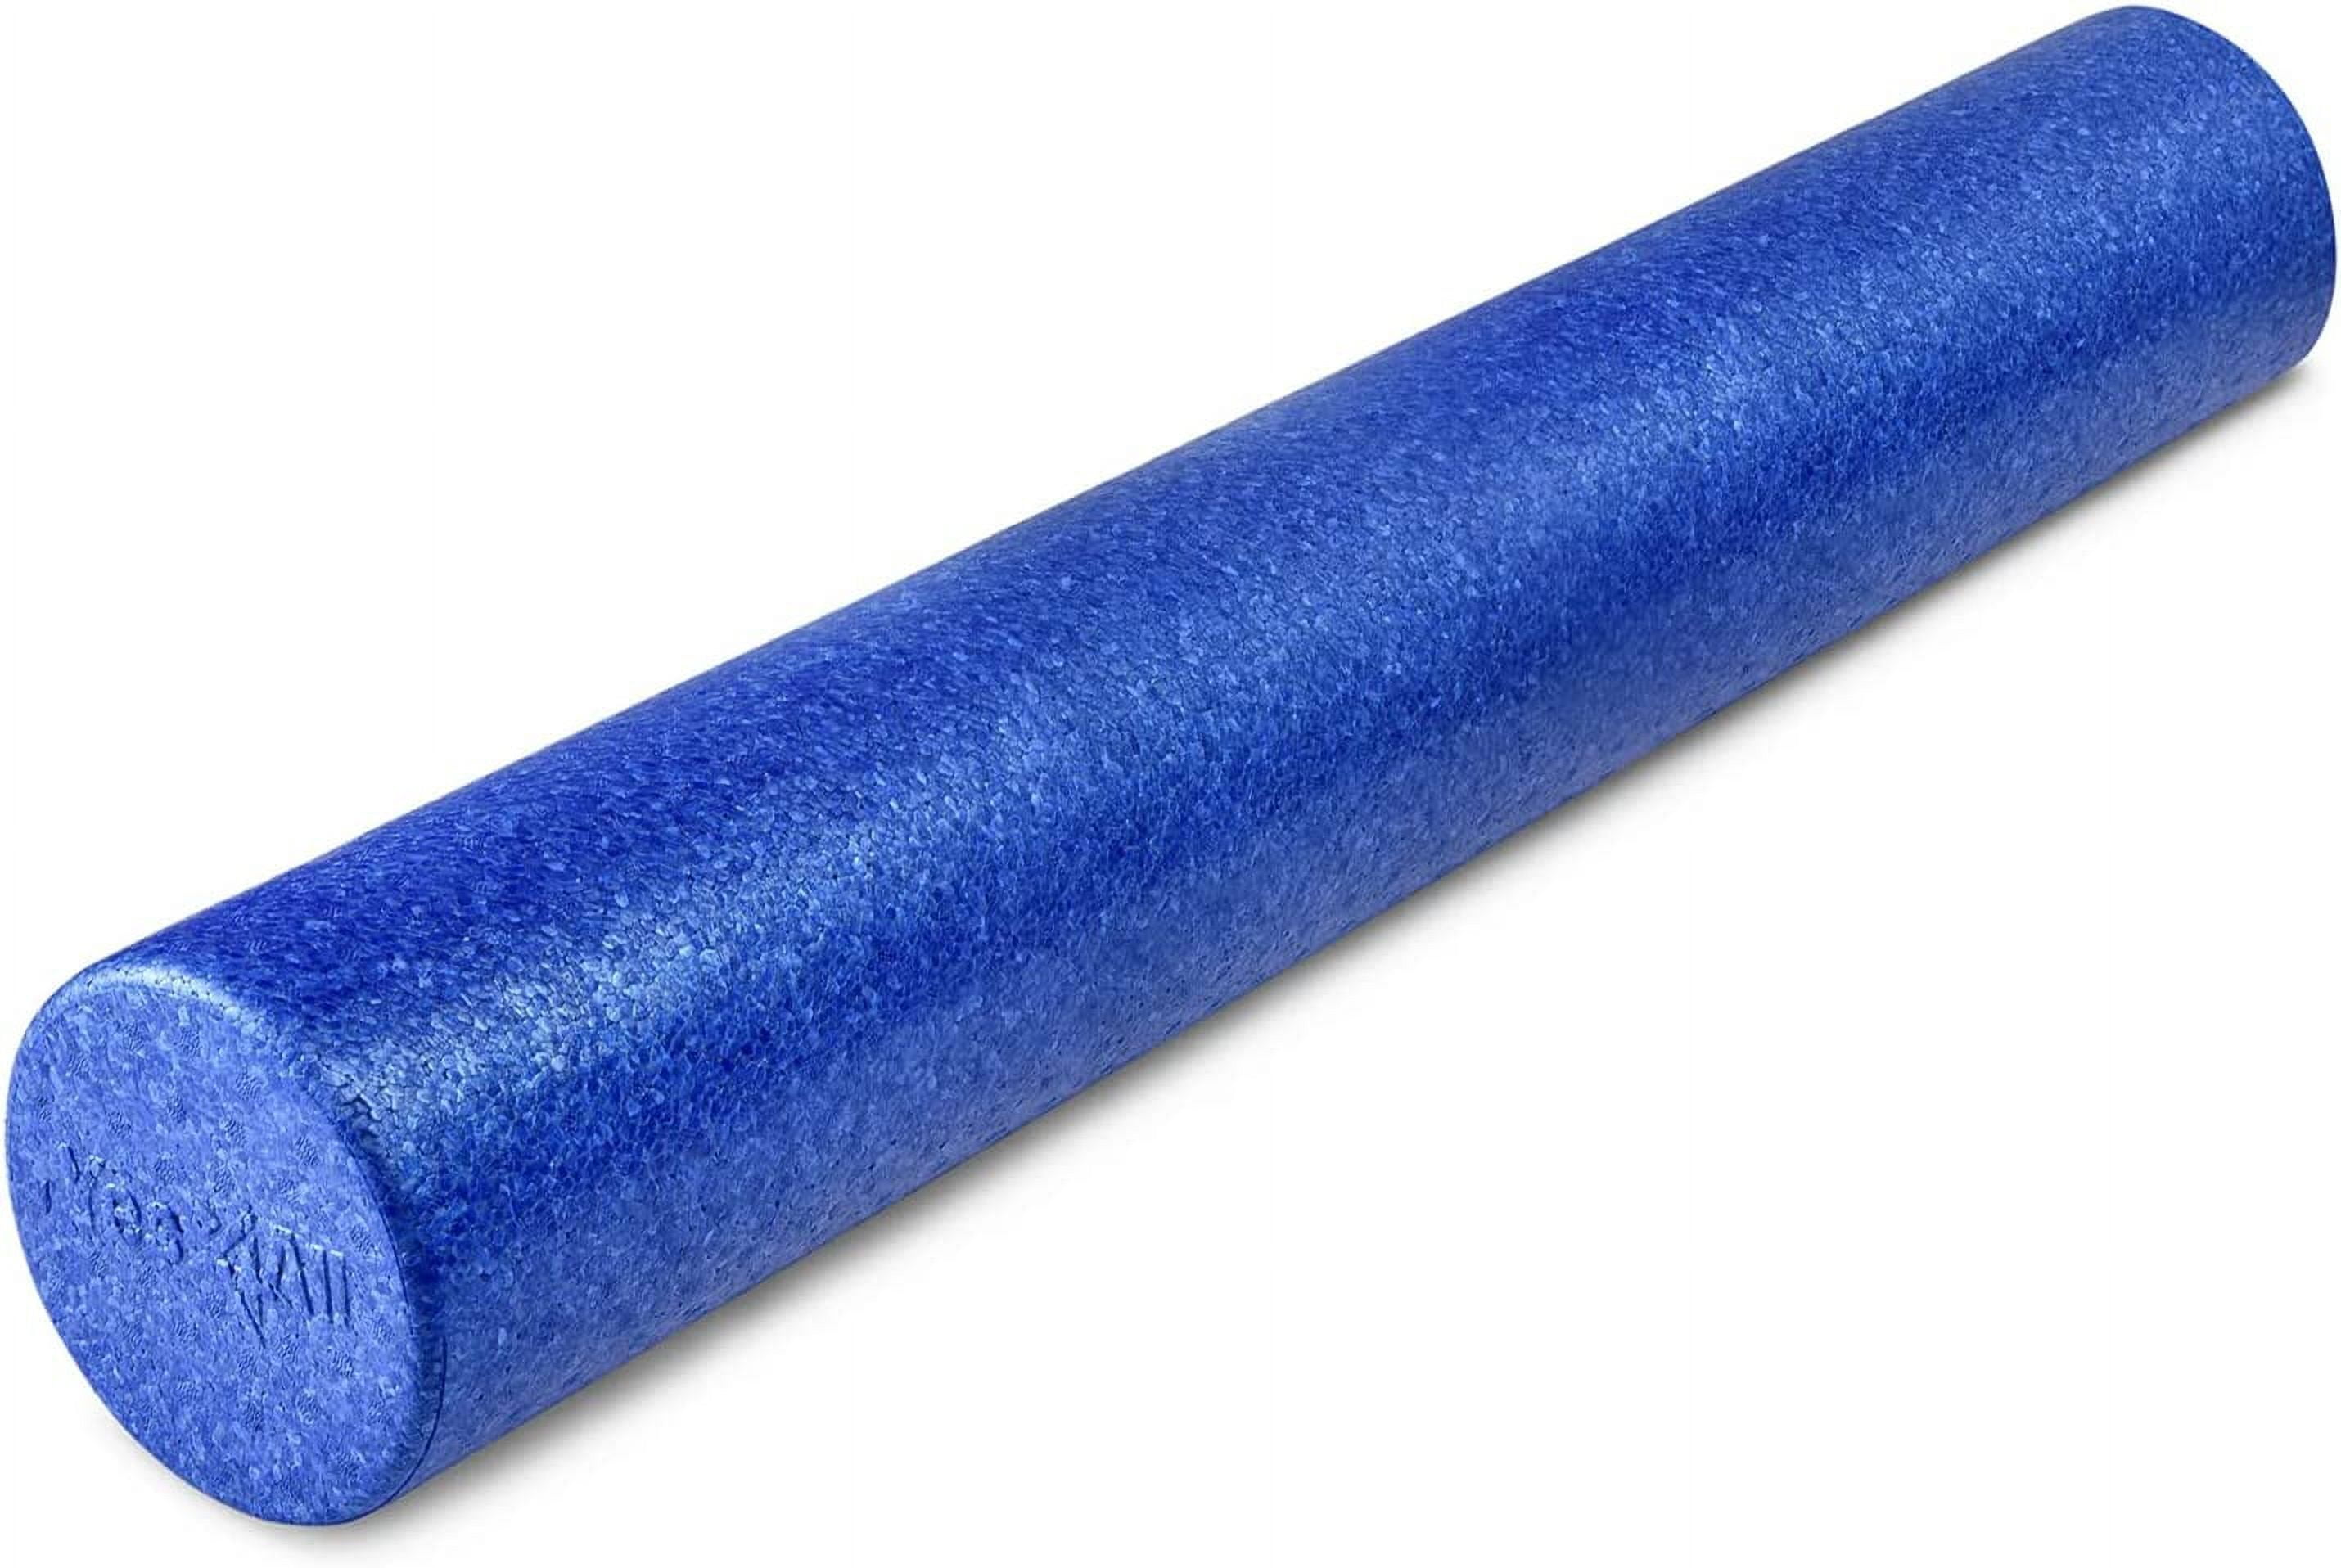 Exercise Foam Rollers for sale in Washington, Pennsylvania, Facebook  Marketplace